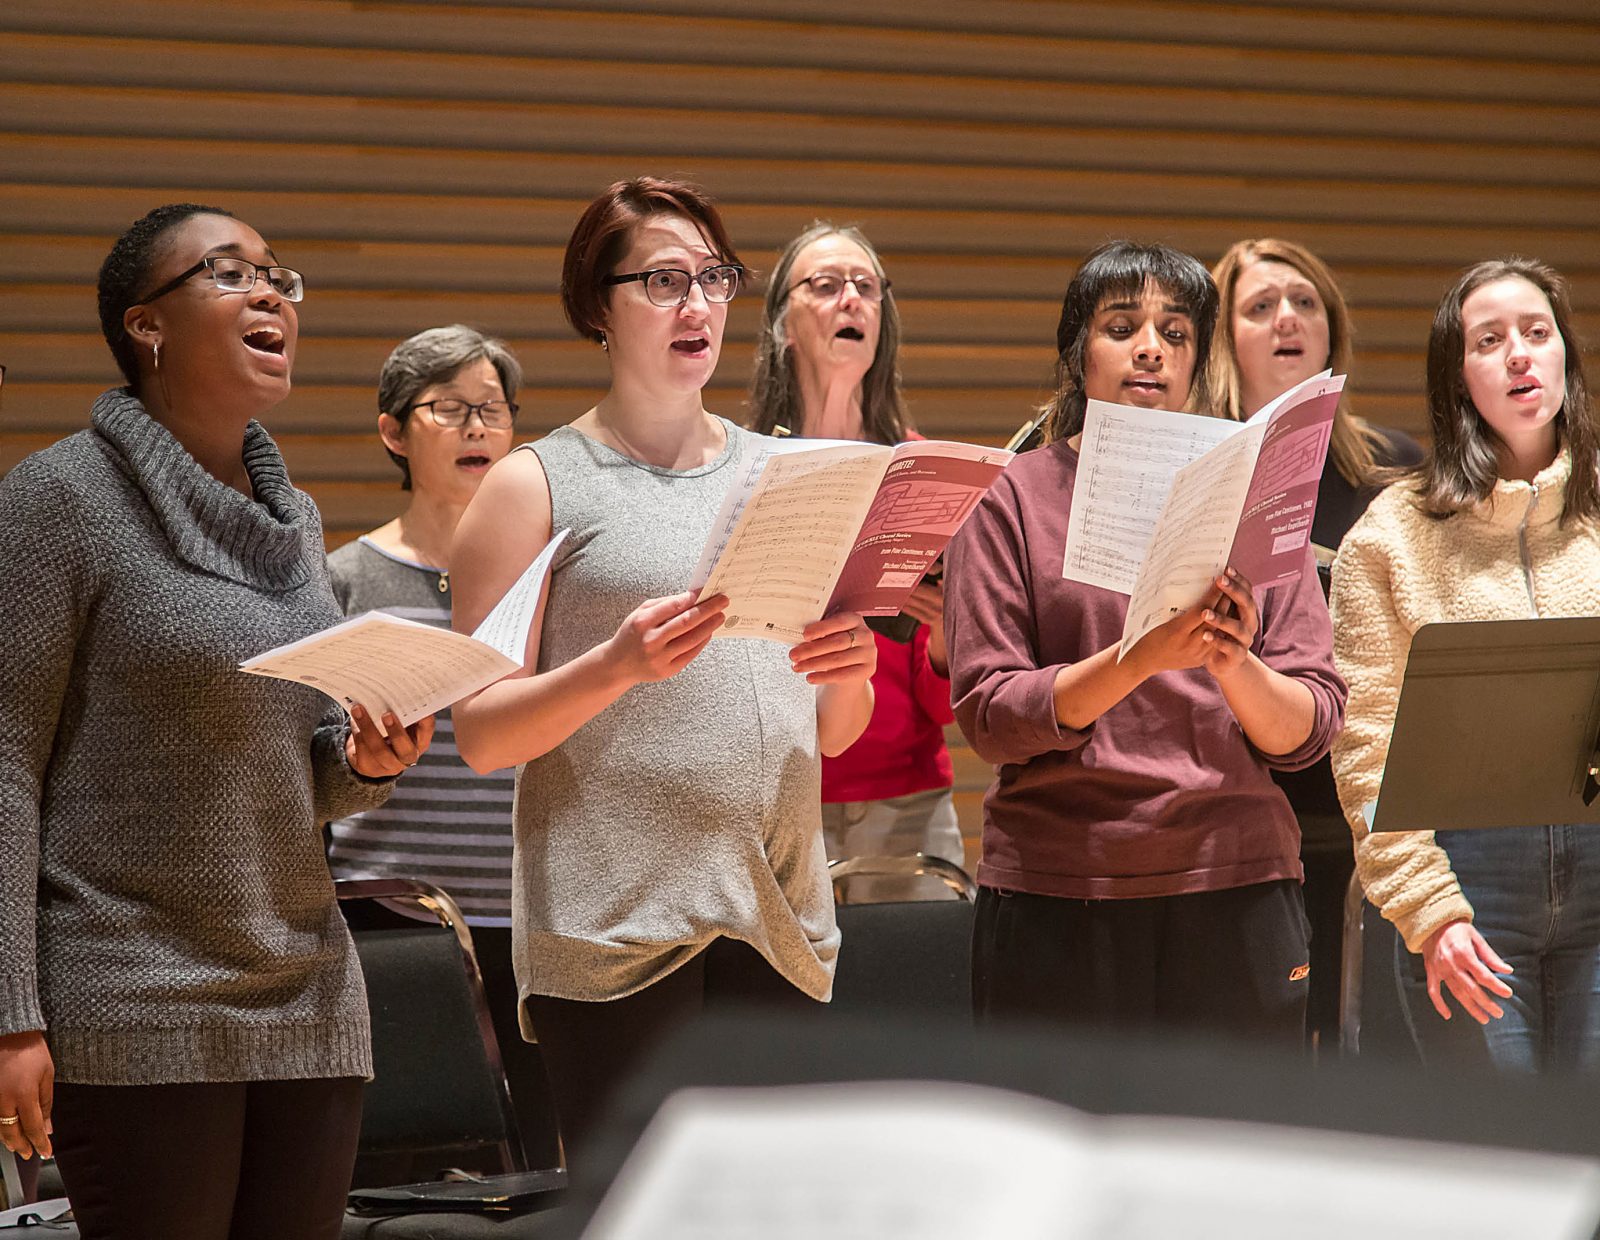 A group of Brock University choir members sing on stage holding sheet music and looking in the direction of the conductors.